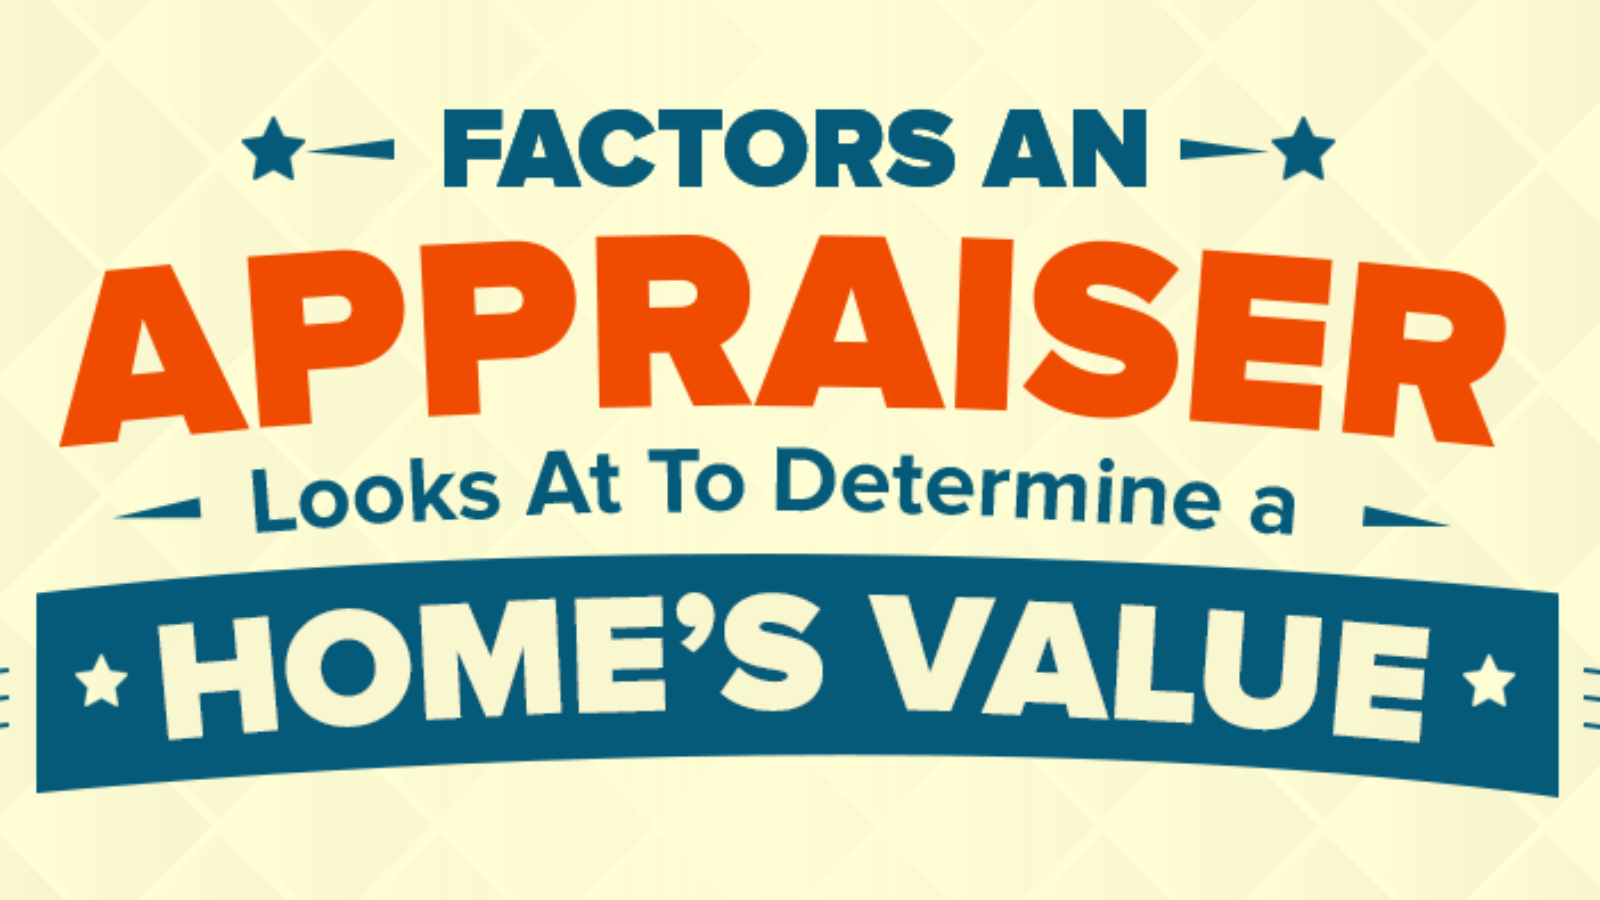 Home Appraisals 101: Factors an Appraiser Looks At To Determine a Home's Value